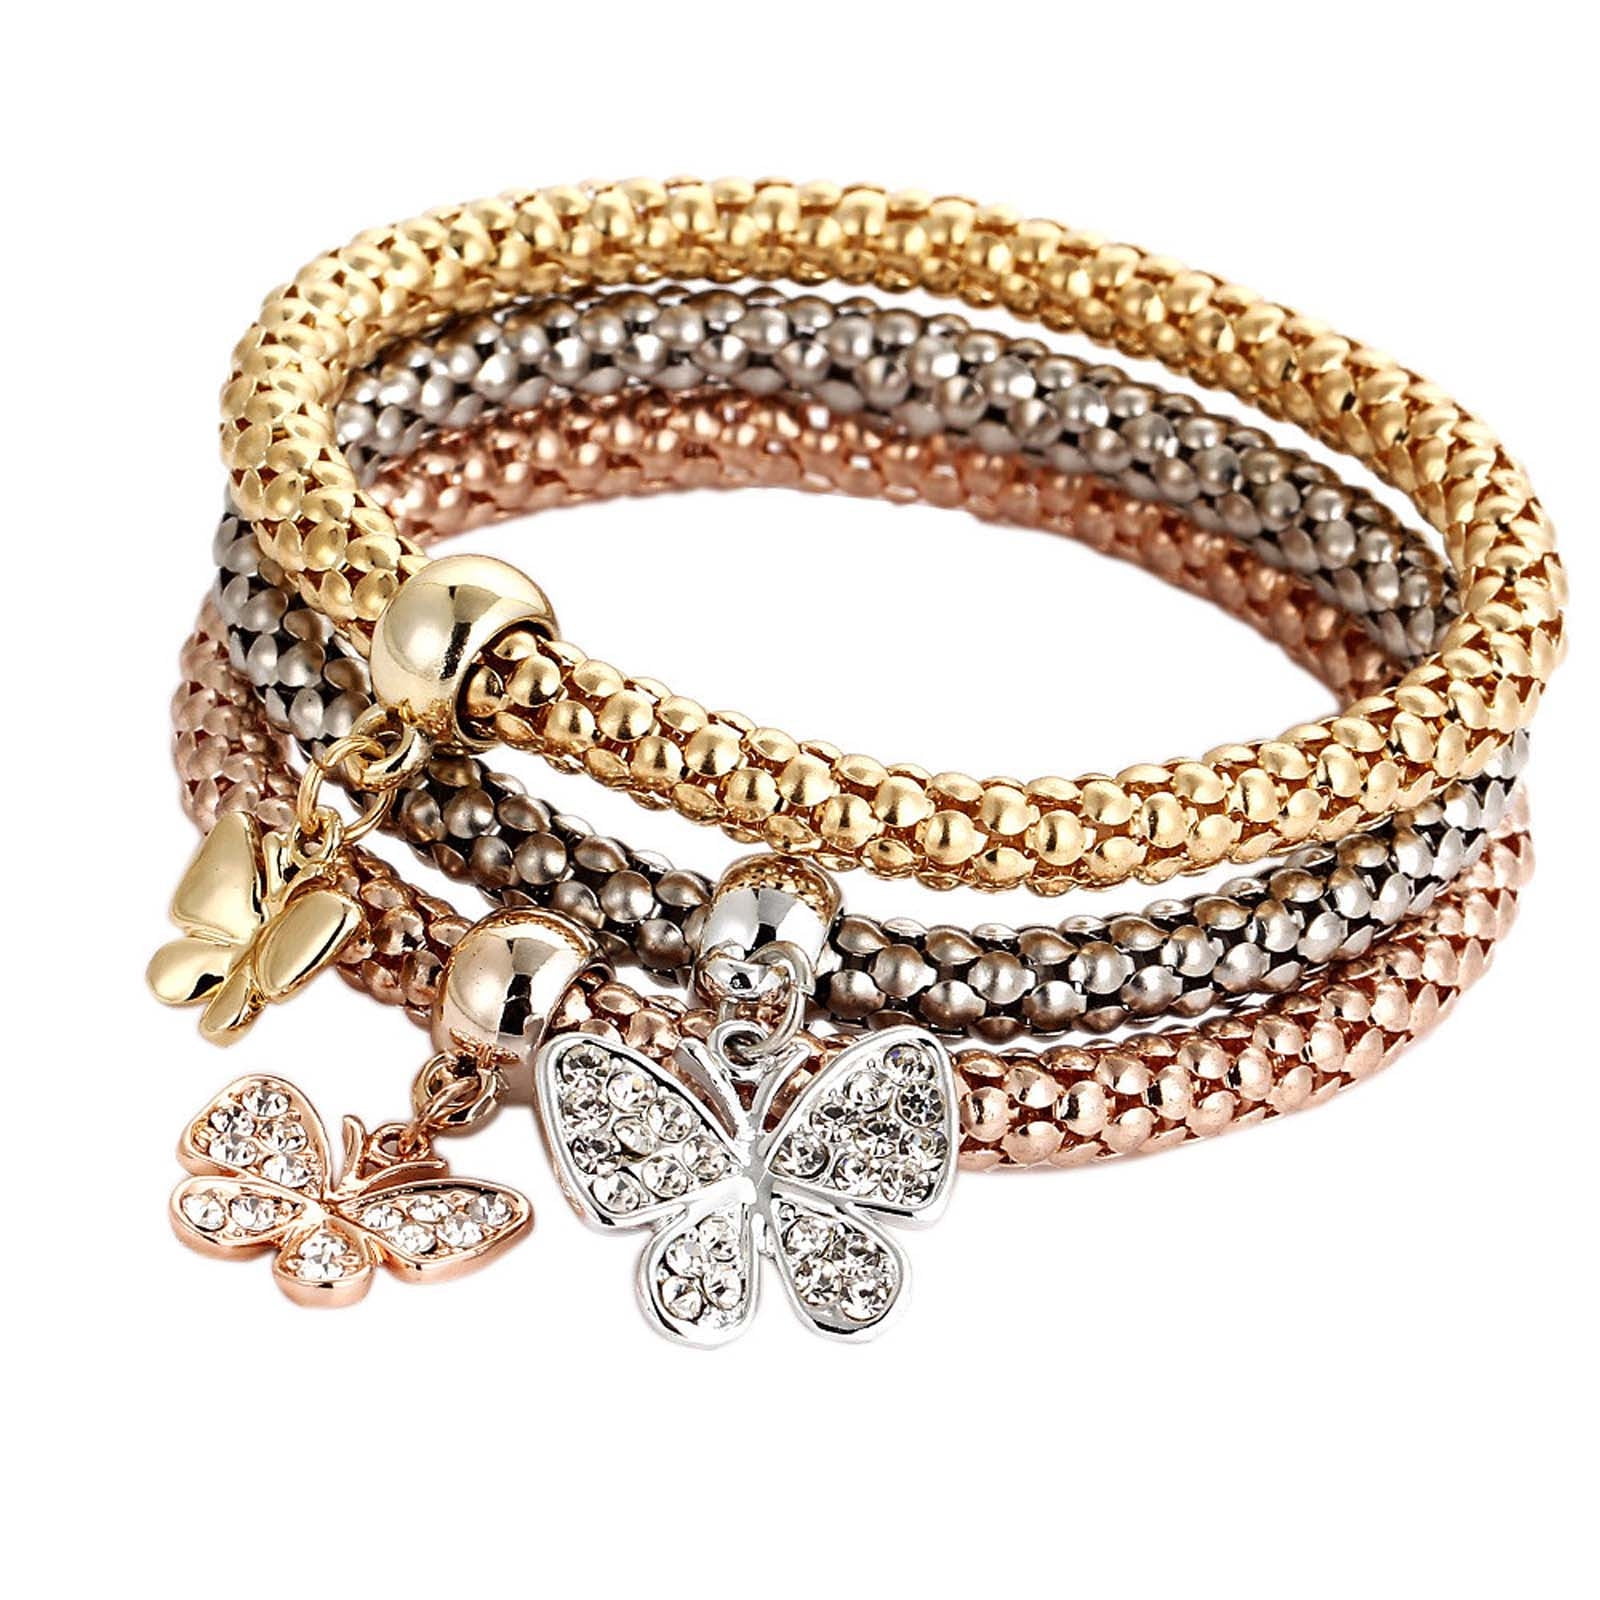 3PCS Gold/Silver/Rose Gold Popcorn Chain Bracelet Tree of Life Heart Edition Charm with Crystal Stretch Bracelet For Women Girls 